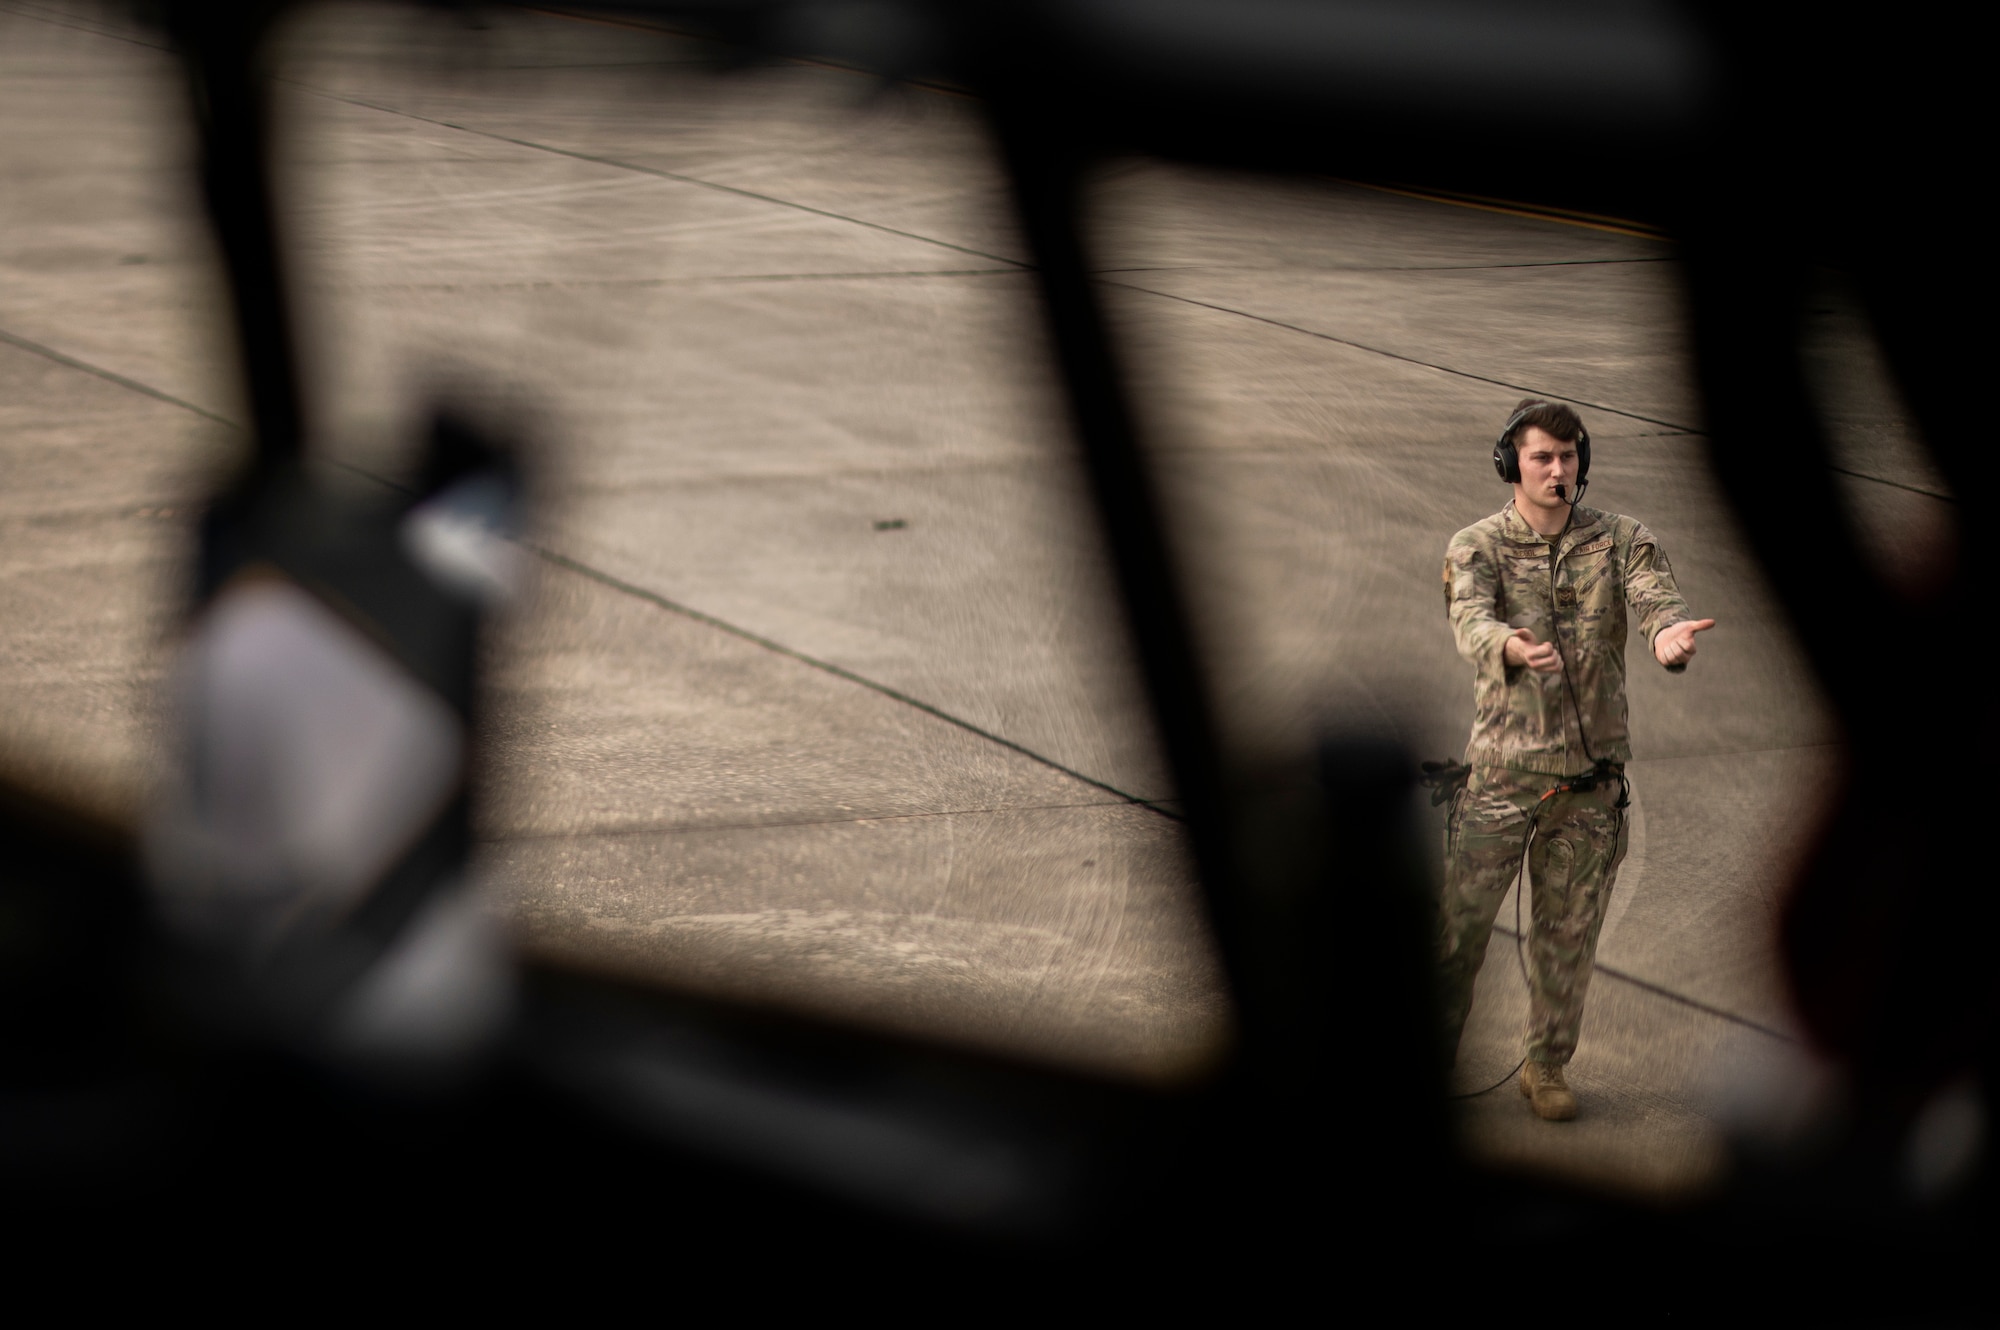 U.S. Air Force Airman 1st Class Jackson McCool, 71st Rescue Squadron HC-130J loadmaster, directs crew chiefs to remove aircraft chocks on the flight line at Moody Air Force Base, Georgia, Aug. 29, 2021. The 71st RQS provided airlift for the 822nd Base Defense Squadron’s deployment. The 822nd BDS were tasked to provide an enhanced security presence at Holloman Air Force Base, New Mexico, in support of Task Force – Holloman. The Department of Defense, through U.S. Northern Command, and in support of the Department of Homeland Security, is providing transportation, temporary housing, medical screening, and general support for at least 50,000 Afghan evacuees at suitable facilities, in permanent or temporary structures, as quickly as possible. This initiative provides Afghan personnel essential support at secure locations outside Afghanistan. (U.S. Air Force photo by Staff Sgt. Devin Boyer)